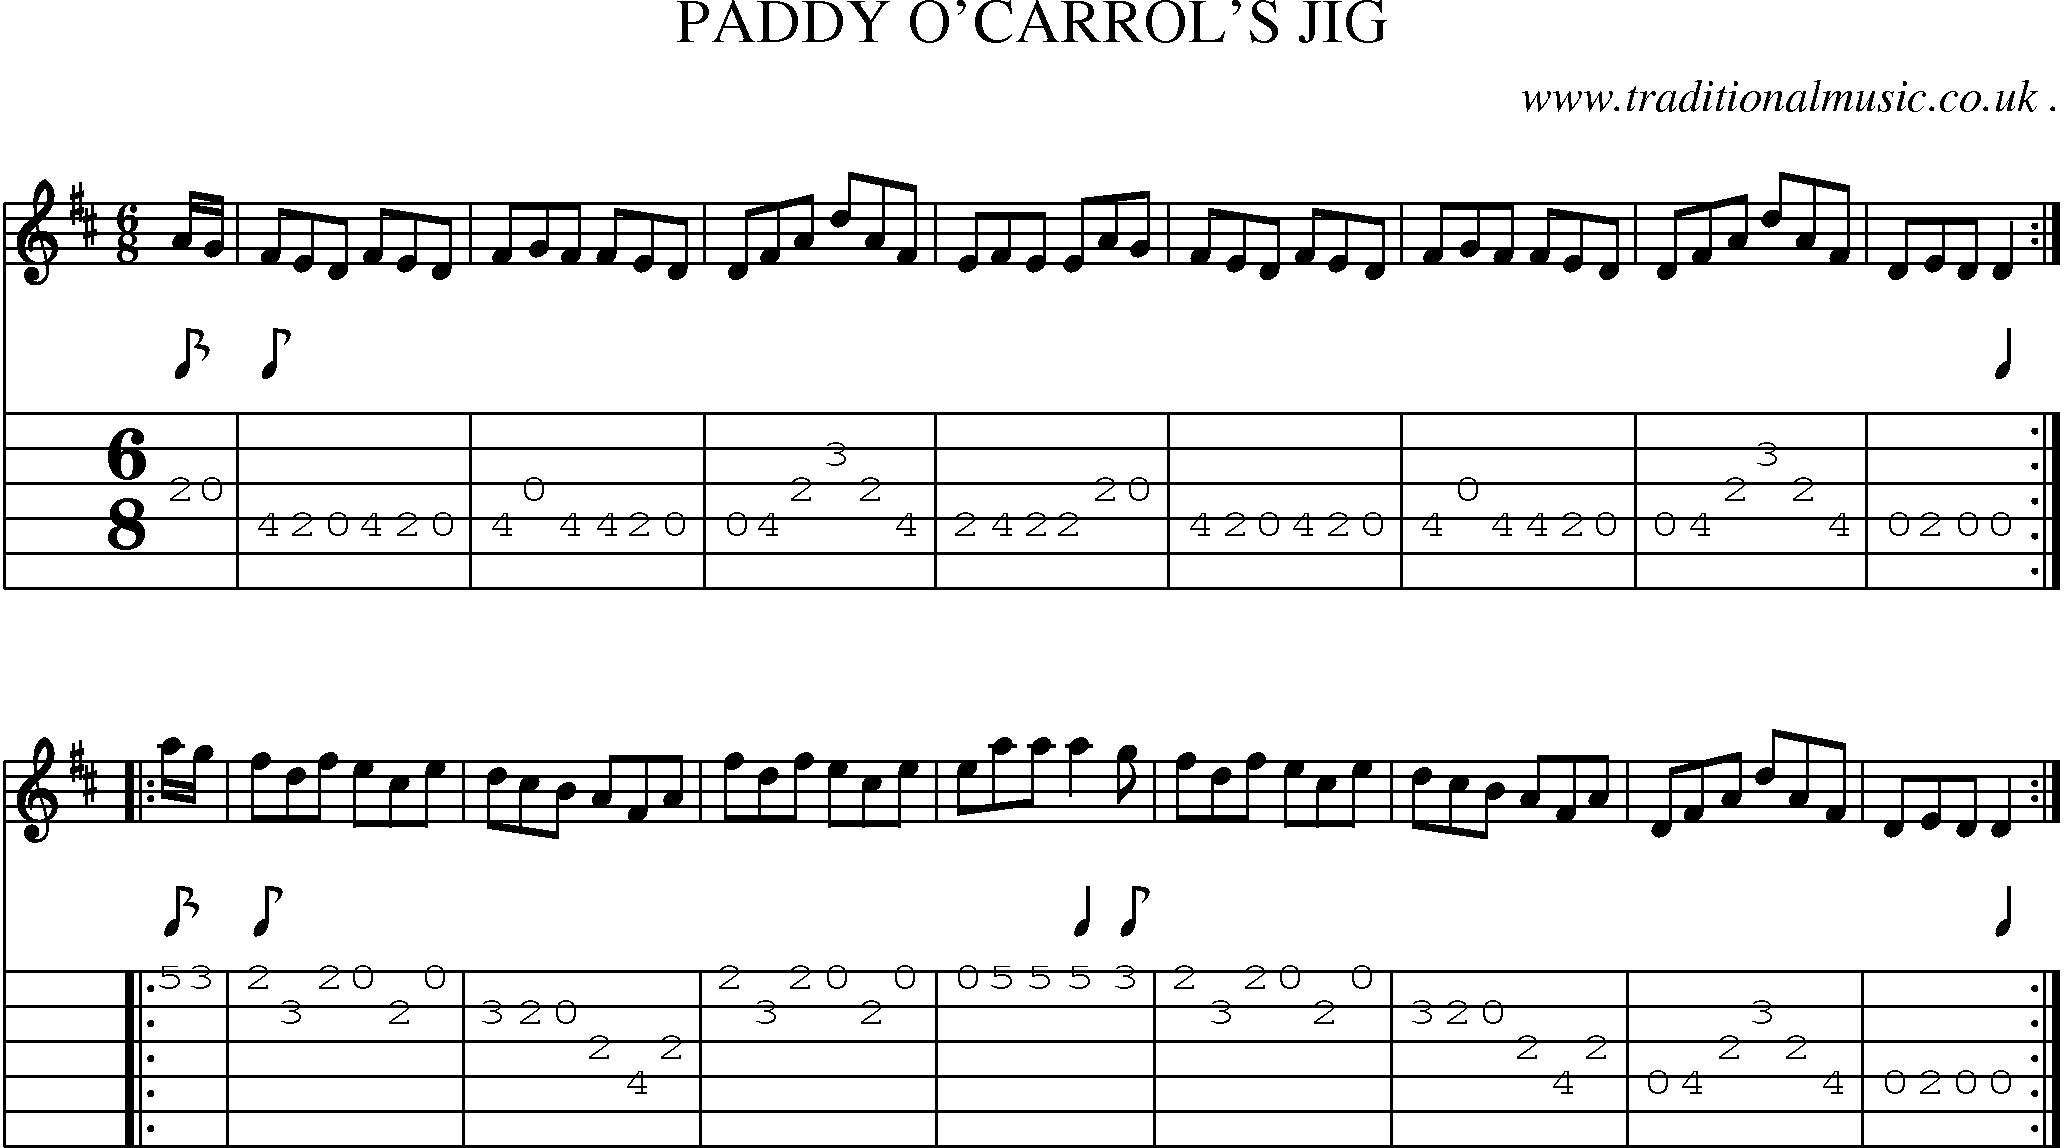 Sheet-Music and Guitar Tabs for Paddy Ocarrols Jig